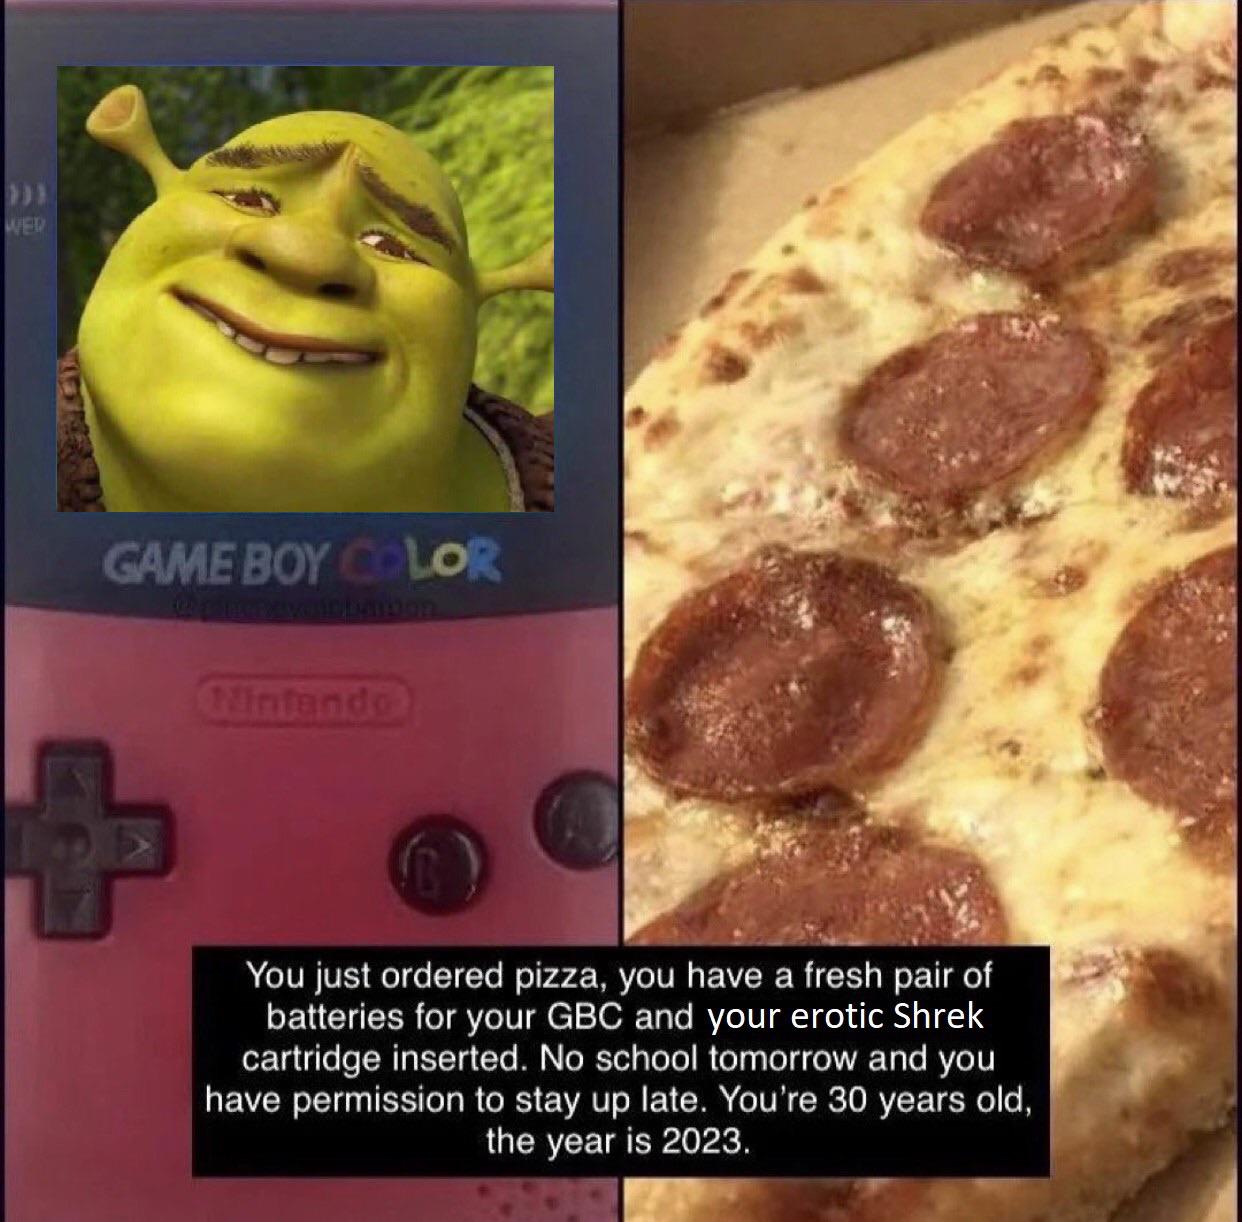 funny friday memes - Wed Game Boy Color Ninfando You just ordered pizza, you have a fresh pair of batteries for your Gbc and your erotic Shrek cartridge inserted. No school tomorrow and you have permission to stay up late. You're 30 years old, the year is